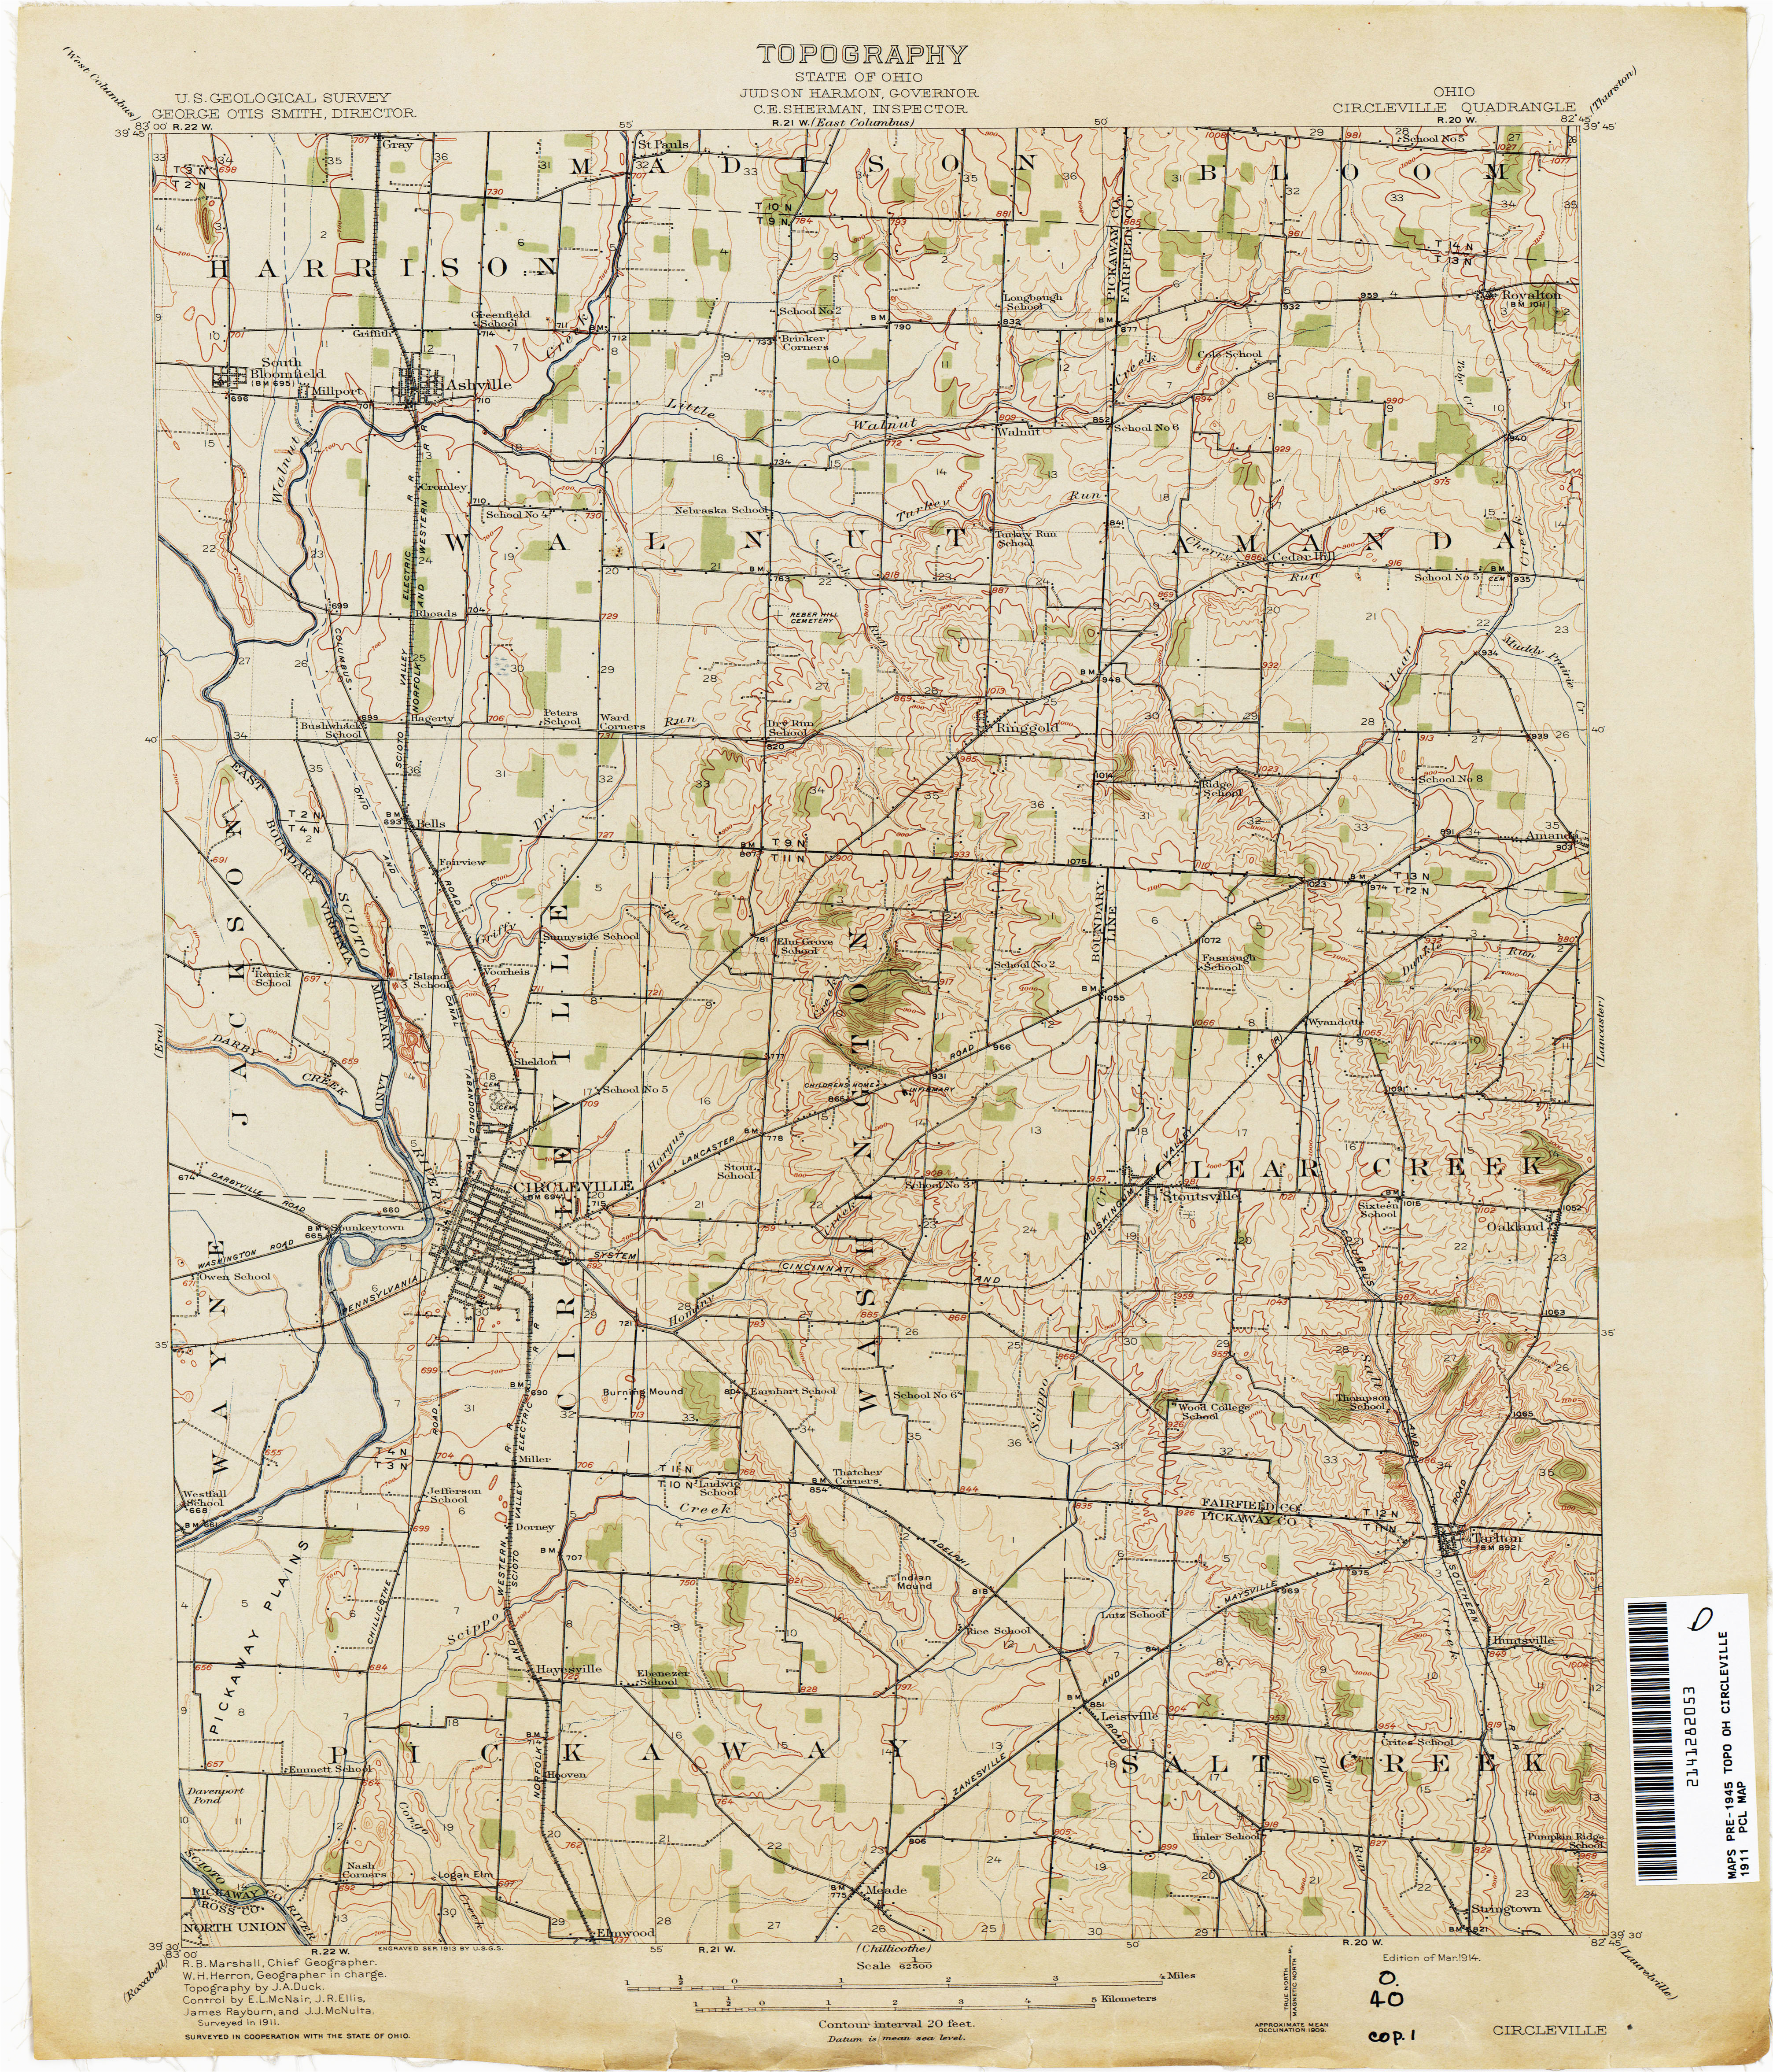 Henry County Ohio Map Ohio Historical Topographic Maps Perry Castaa Eda Map Collection Of Henry County Ohio Map 2 